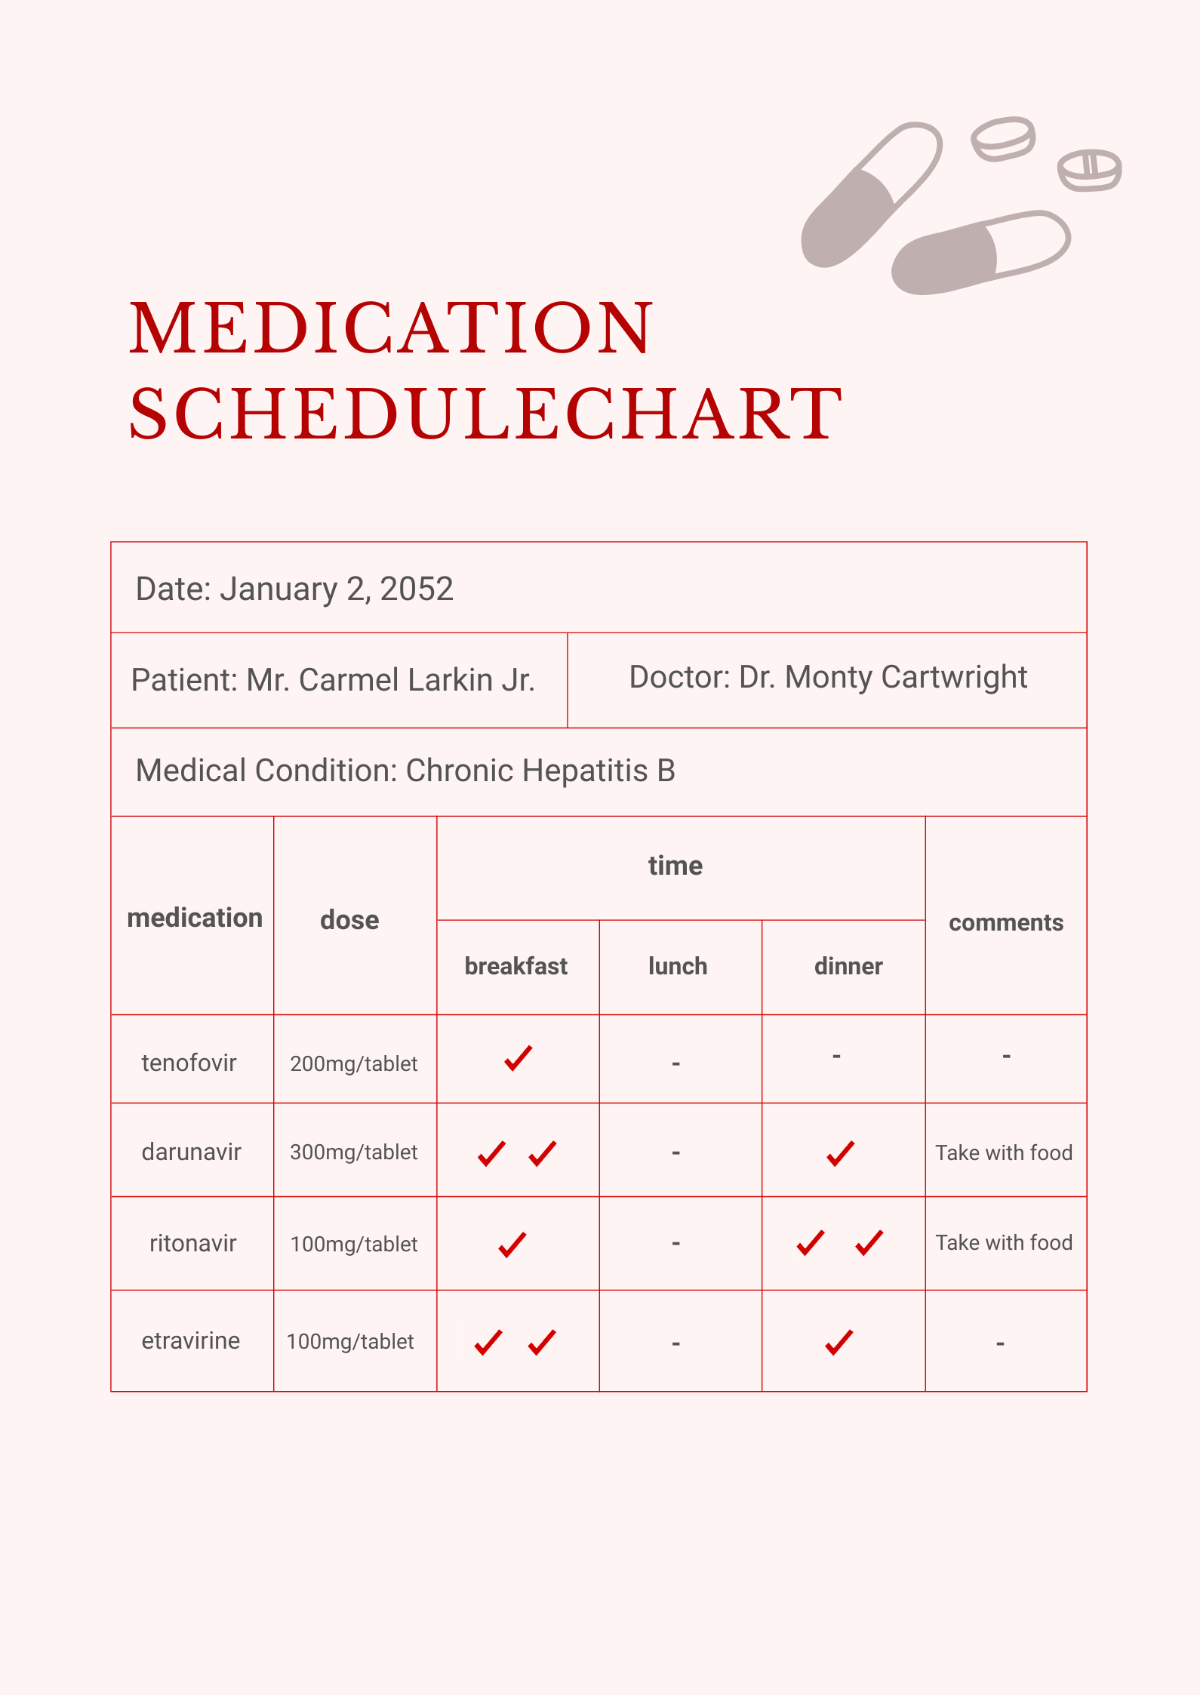 Medication Schedule Chart Template